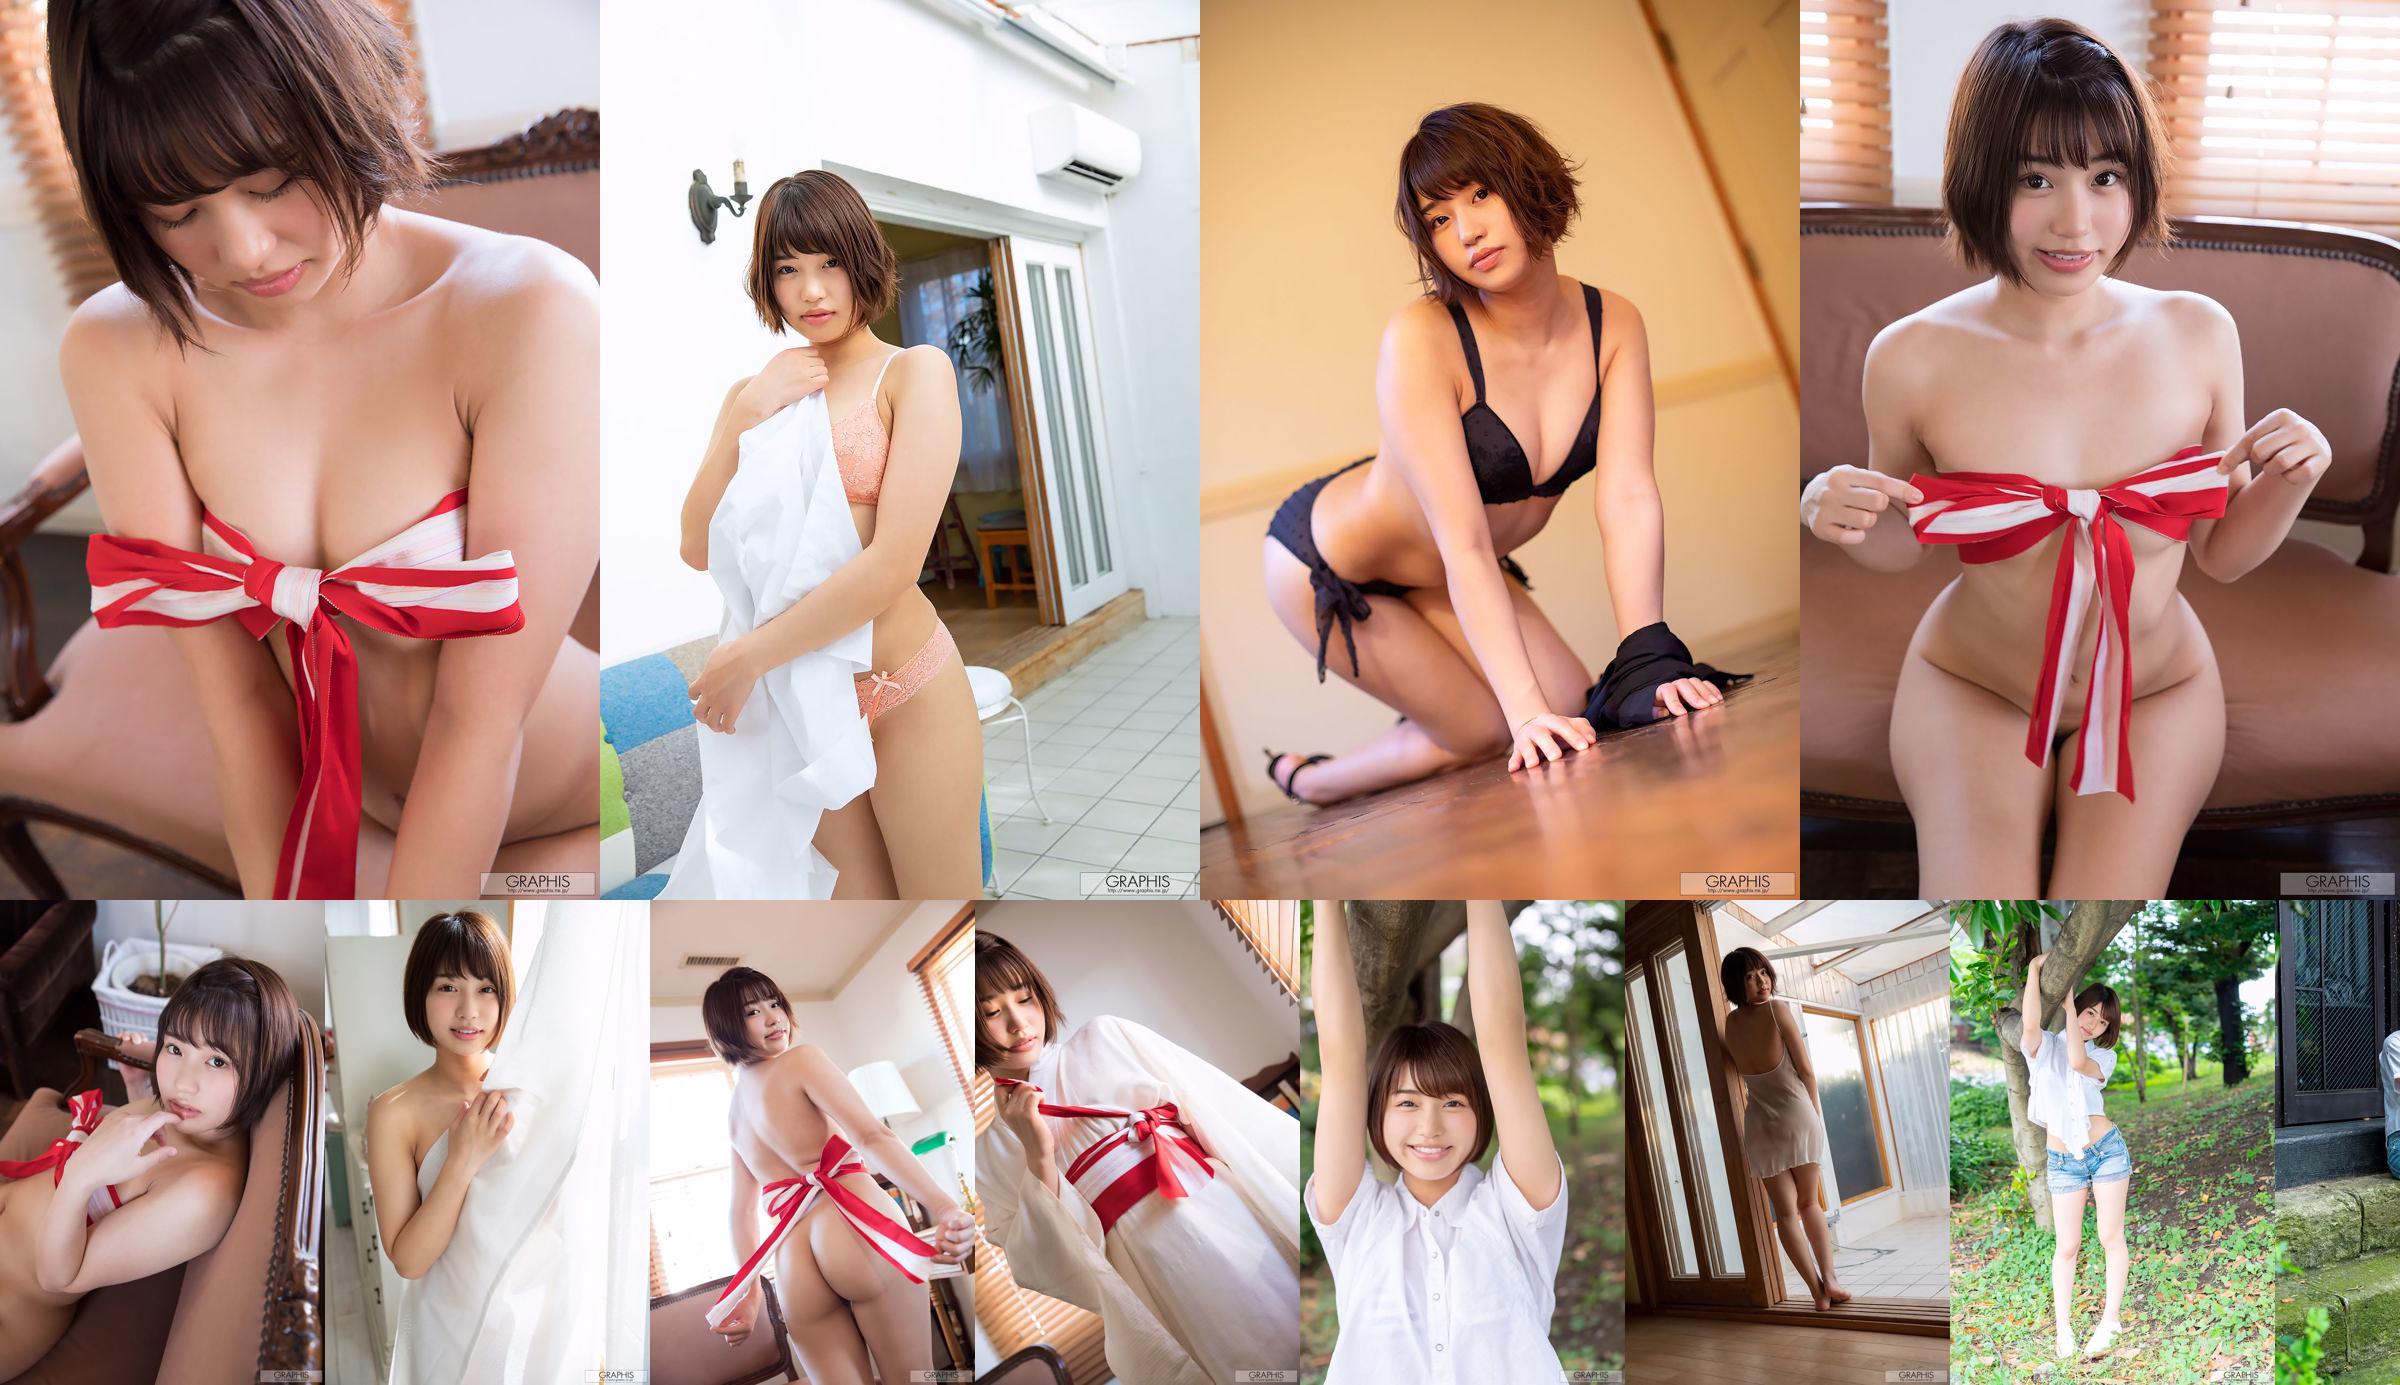 Mahiro Tadai Mahiro Tadai / Mahiro Tadai [Graphis] First Gravure First off daughter No.6dc0bd Page 1